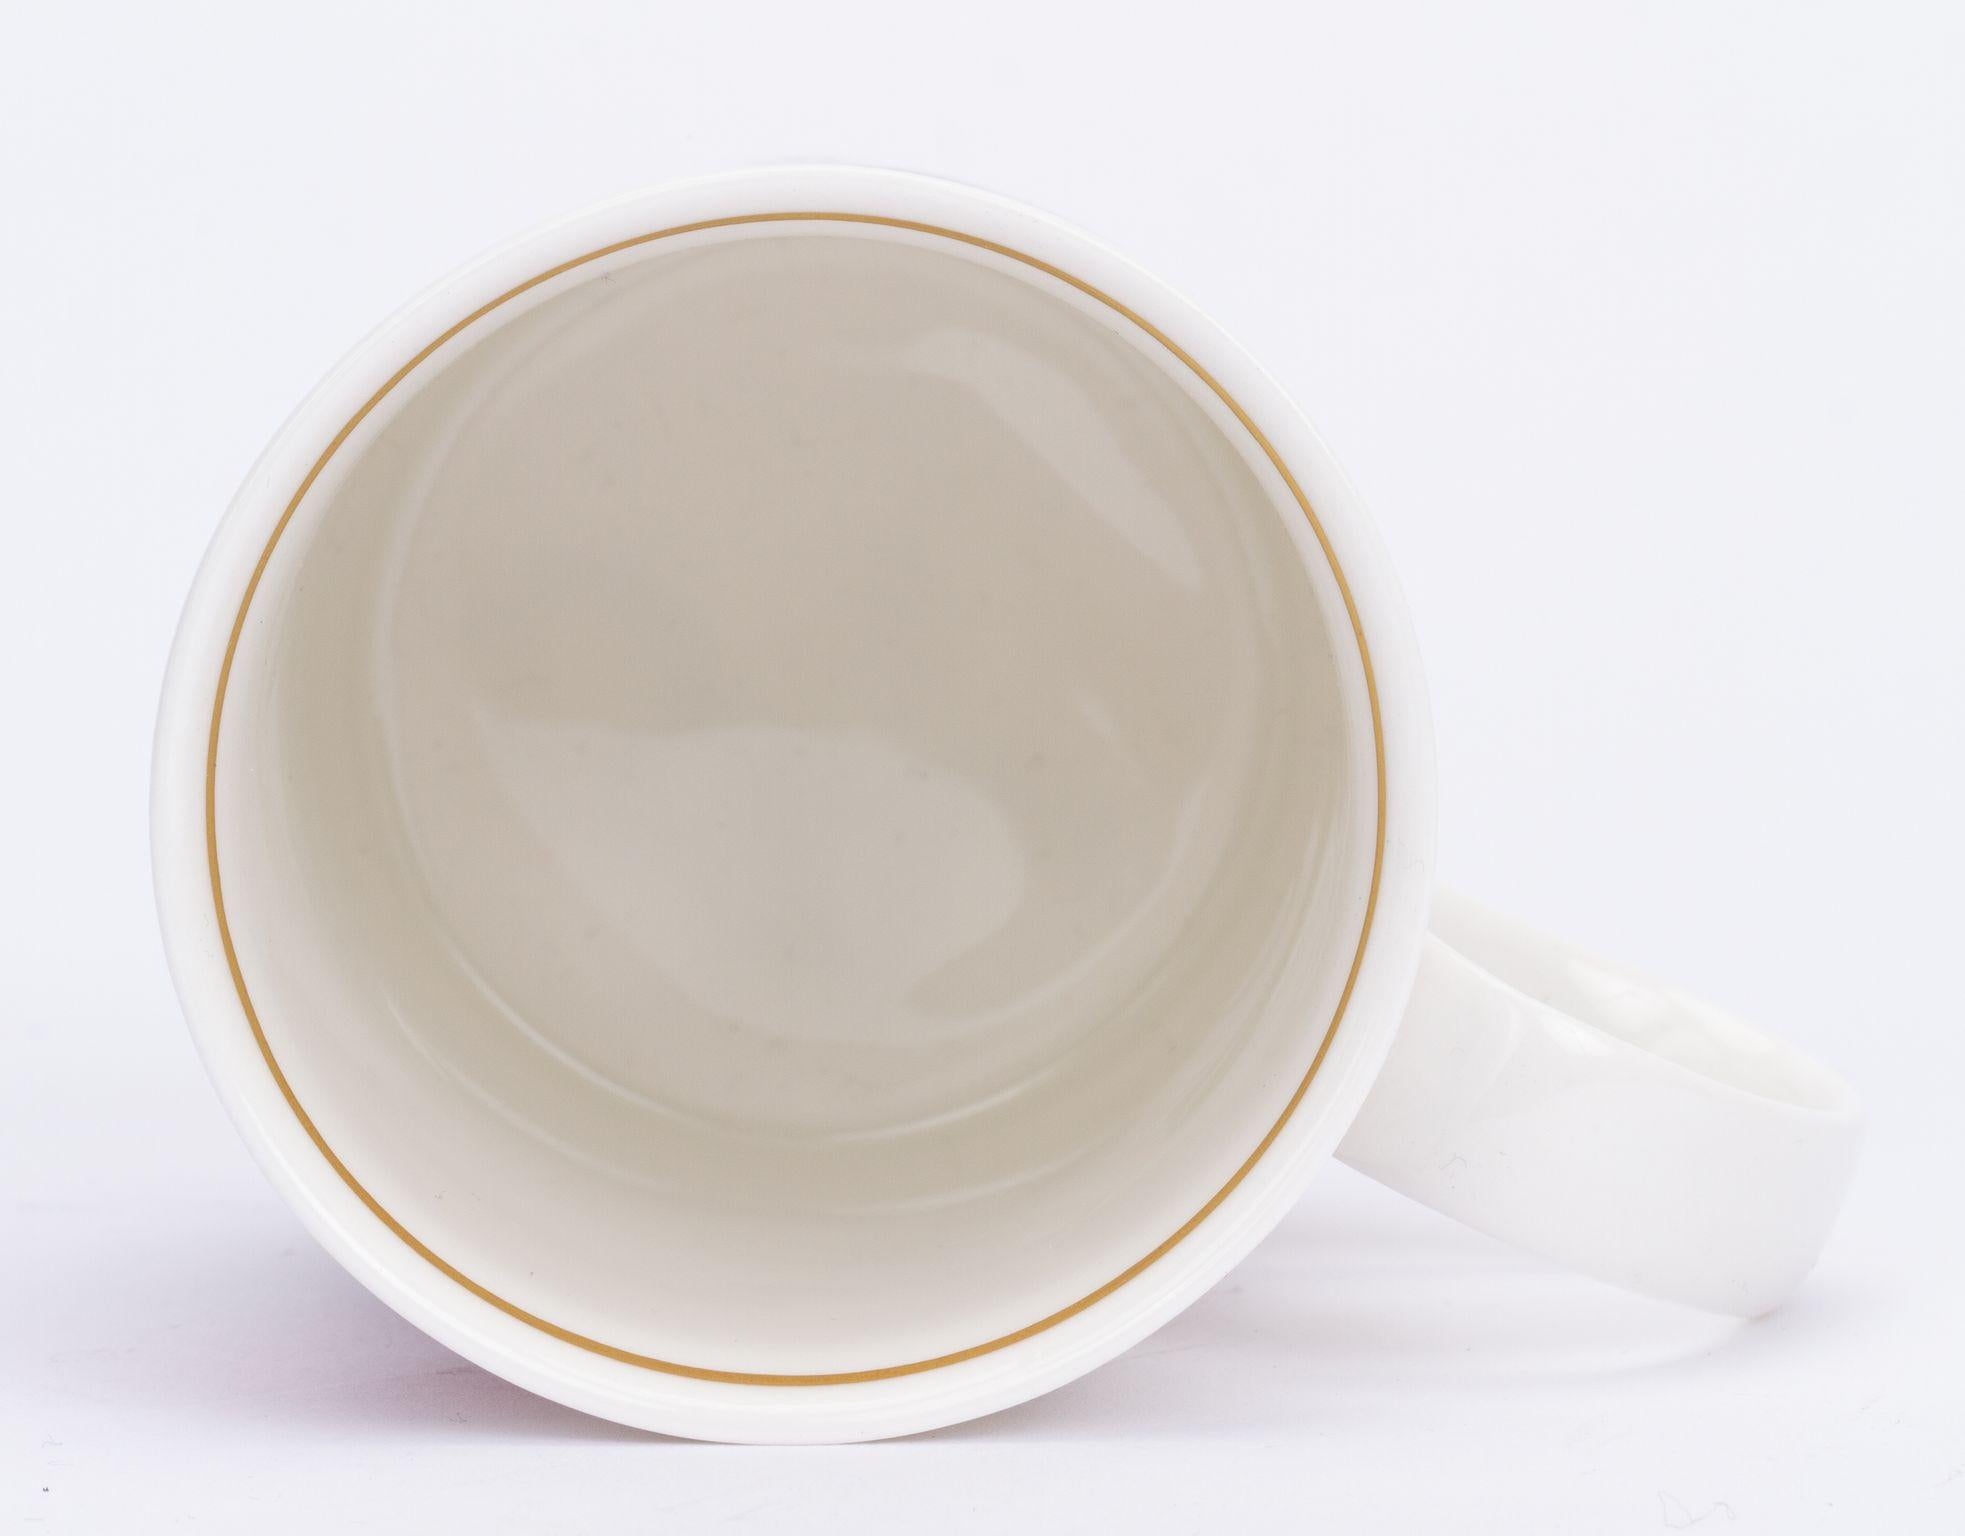 Gucci set/2 Porcelain Knights Tea Cups In Excellent Condition For Sale In West Hollywood, CA